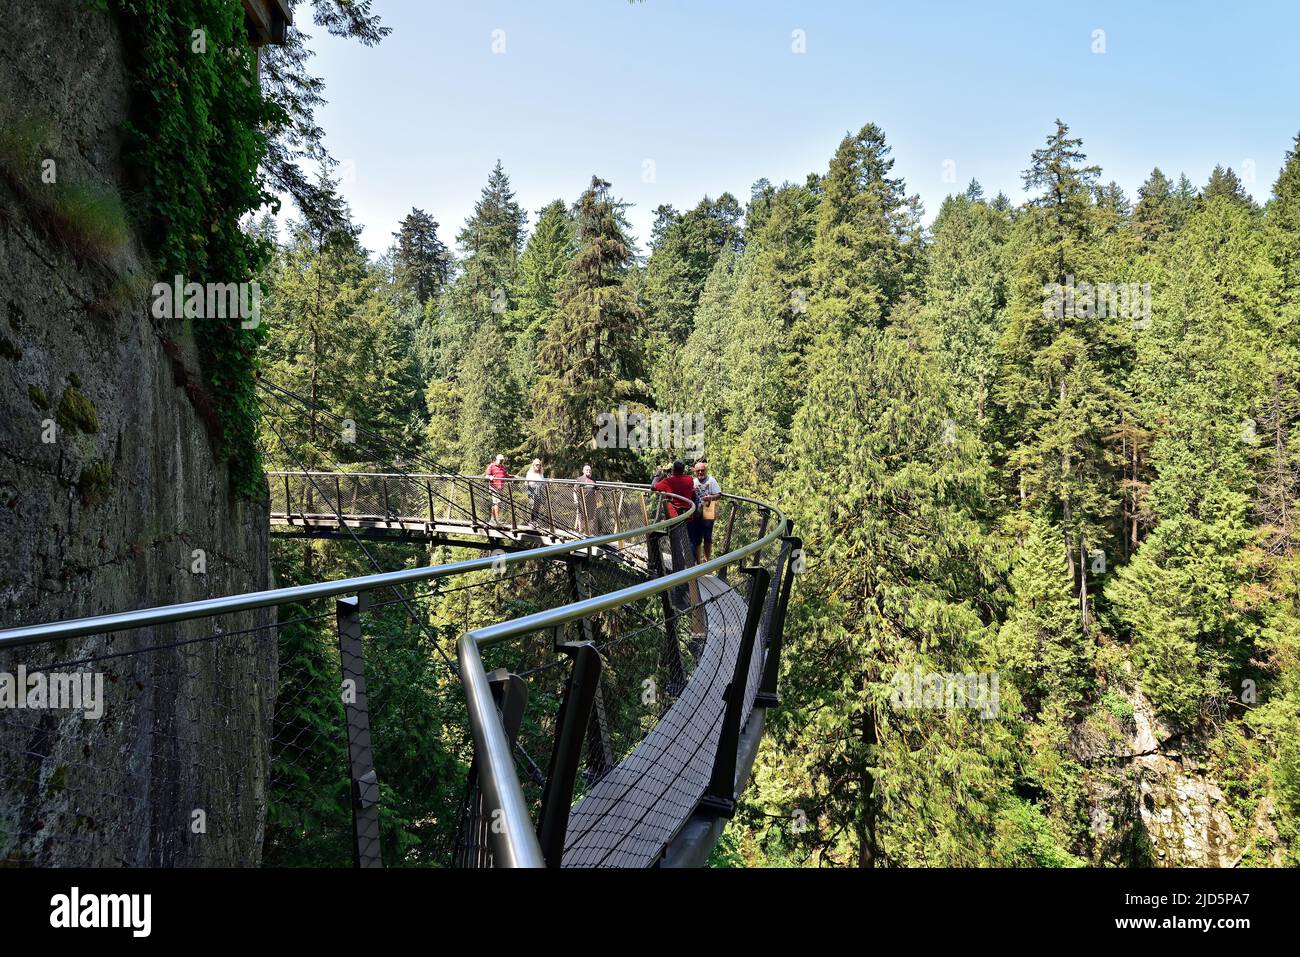 VANCOUVER, BRITISH COLUMBIA, CANADA, MAY 31, 2019: Visitors exploring the Capilano Cliff Walk through rainforest. The popular suspended walkways juts Stock Photo